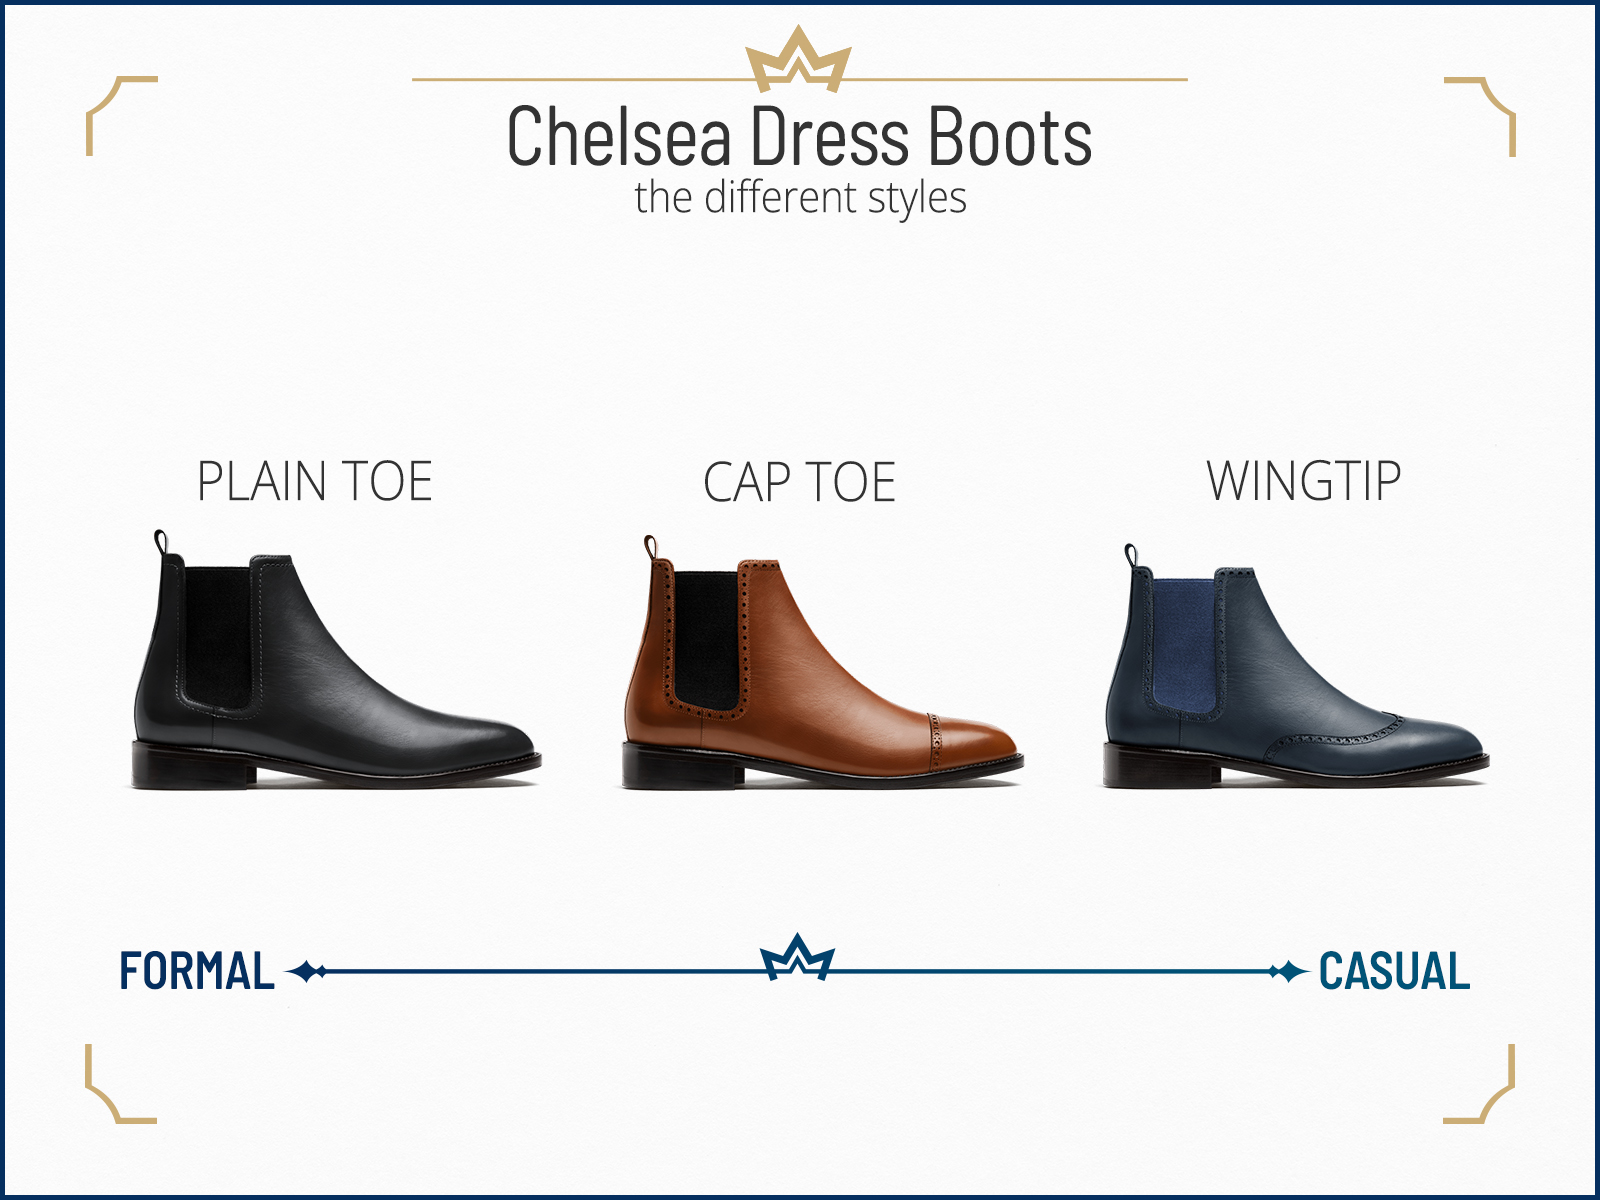 Different Chelsea dress boot types